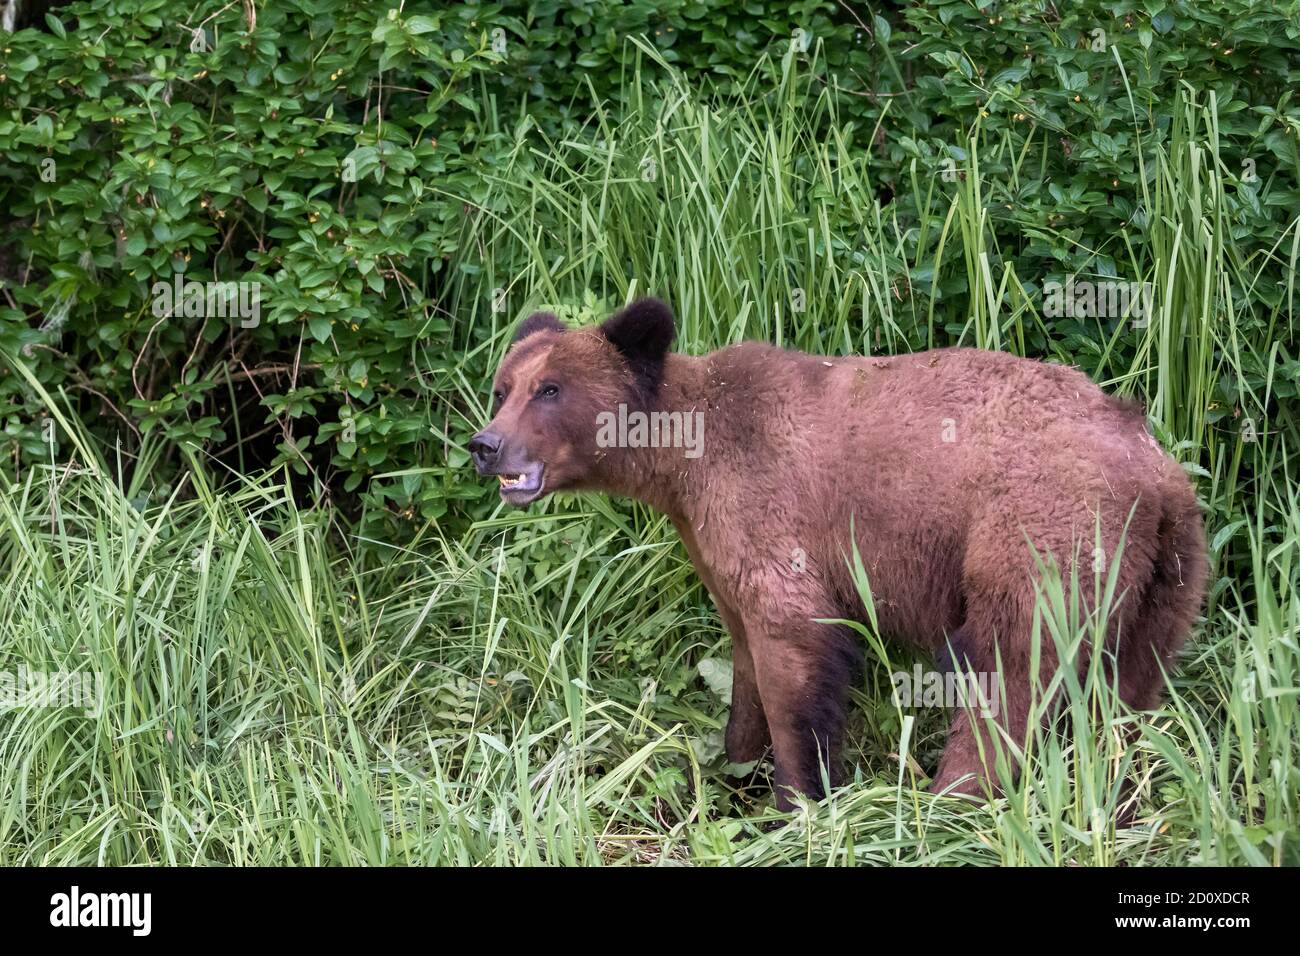 Grizzly bear in tall grass next to the forest, Khutzeymateen, BC Stock Photo